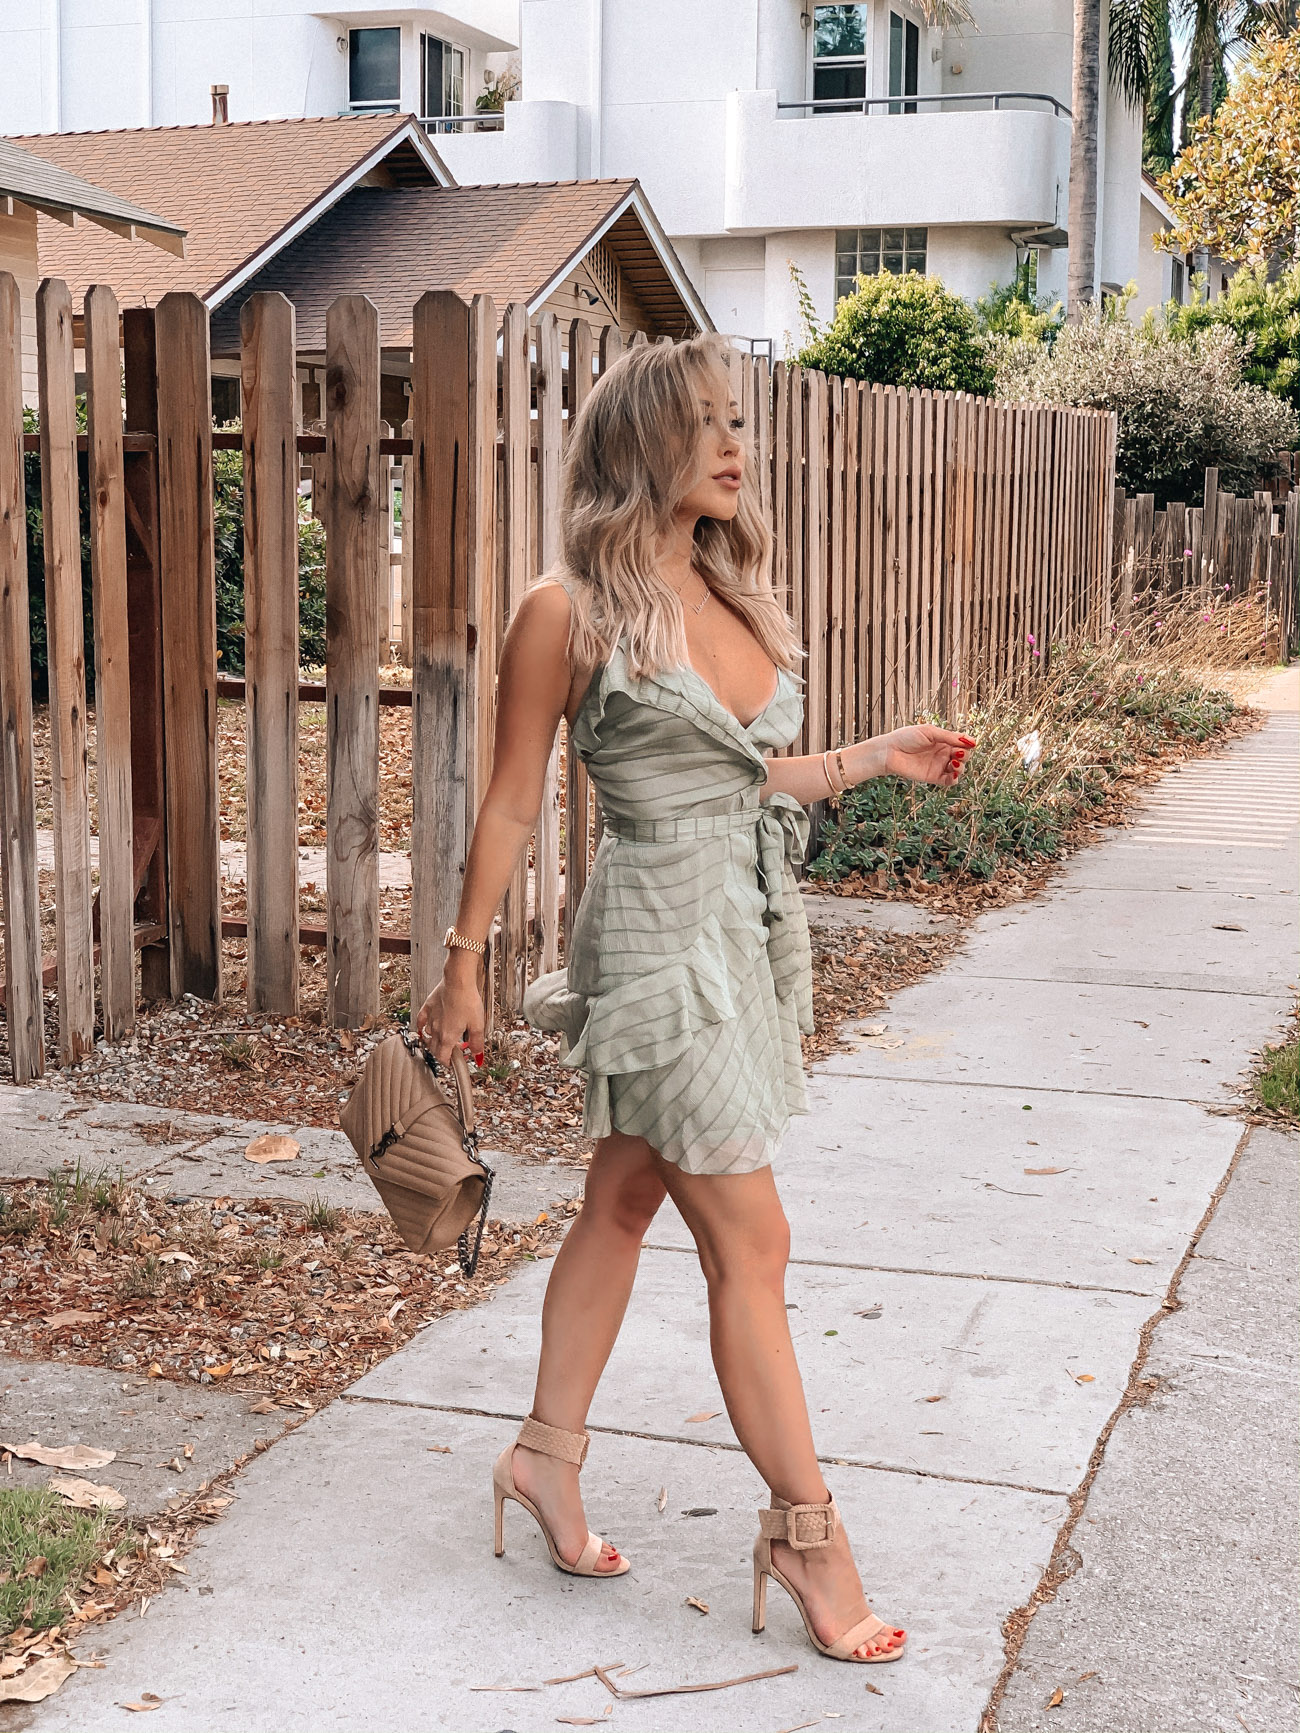 Mint Green Chiffon Summer Dress | Summer Flow | Taupe YSL Bag | Blondie in the City by Hayley Larue